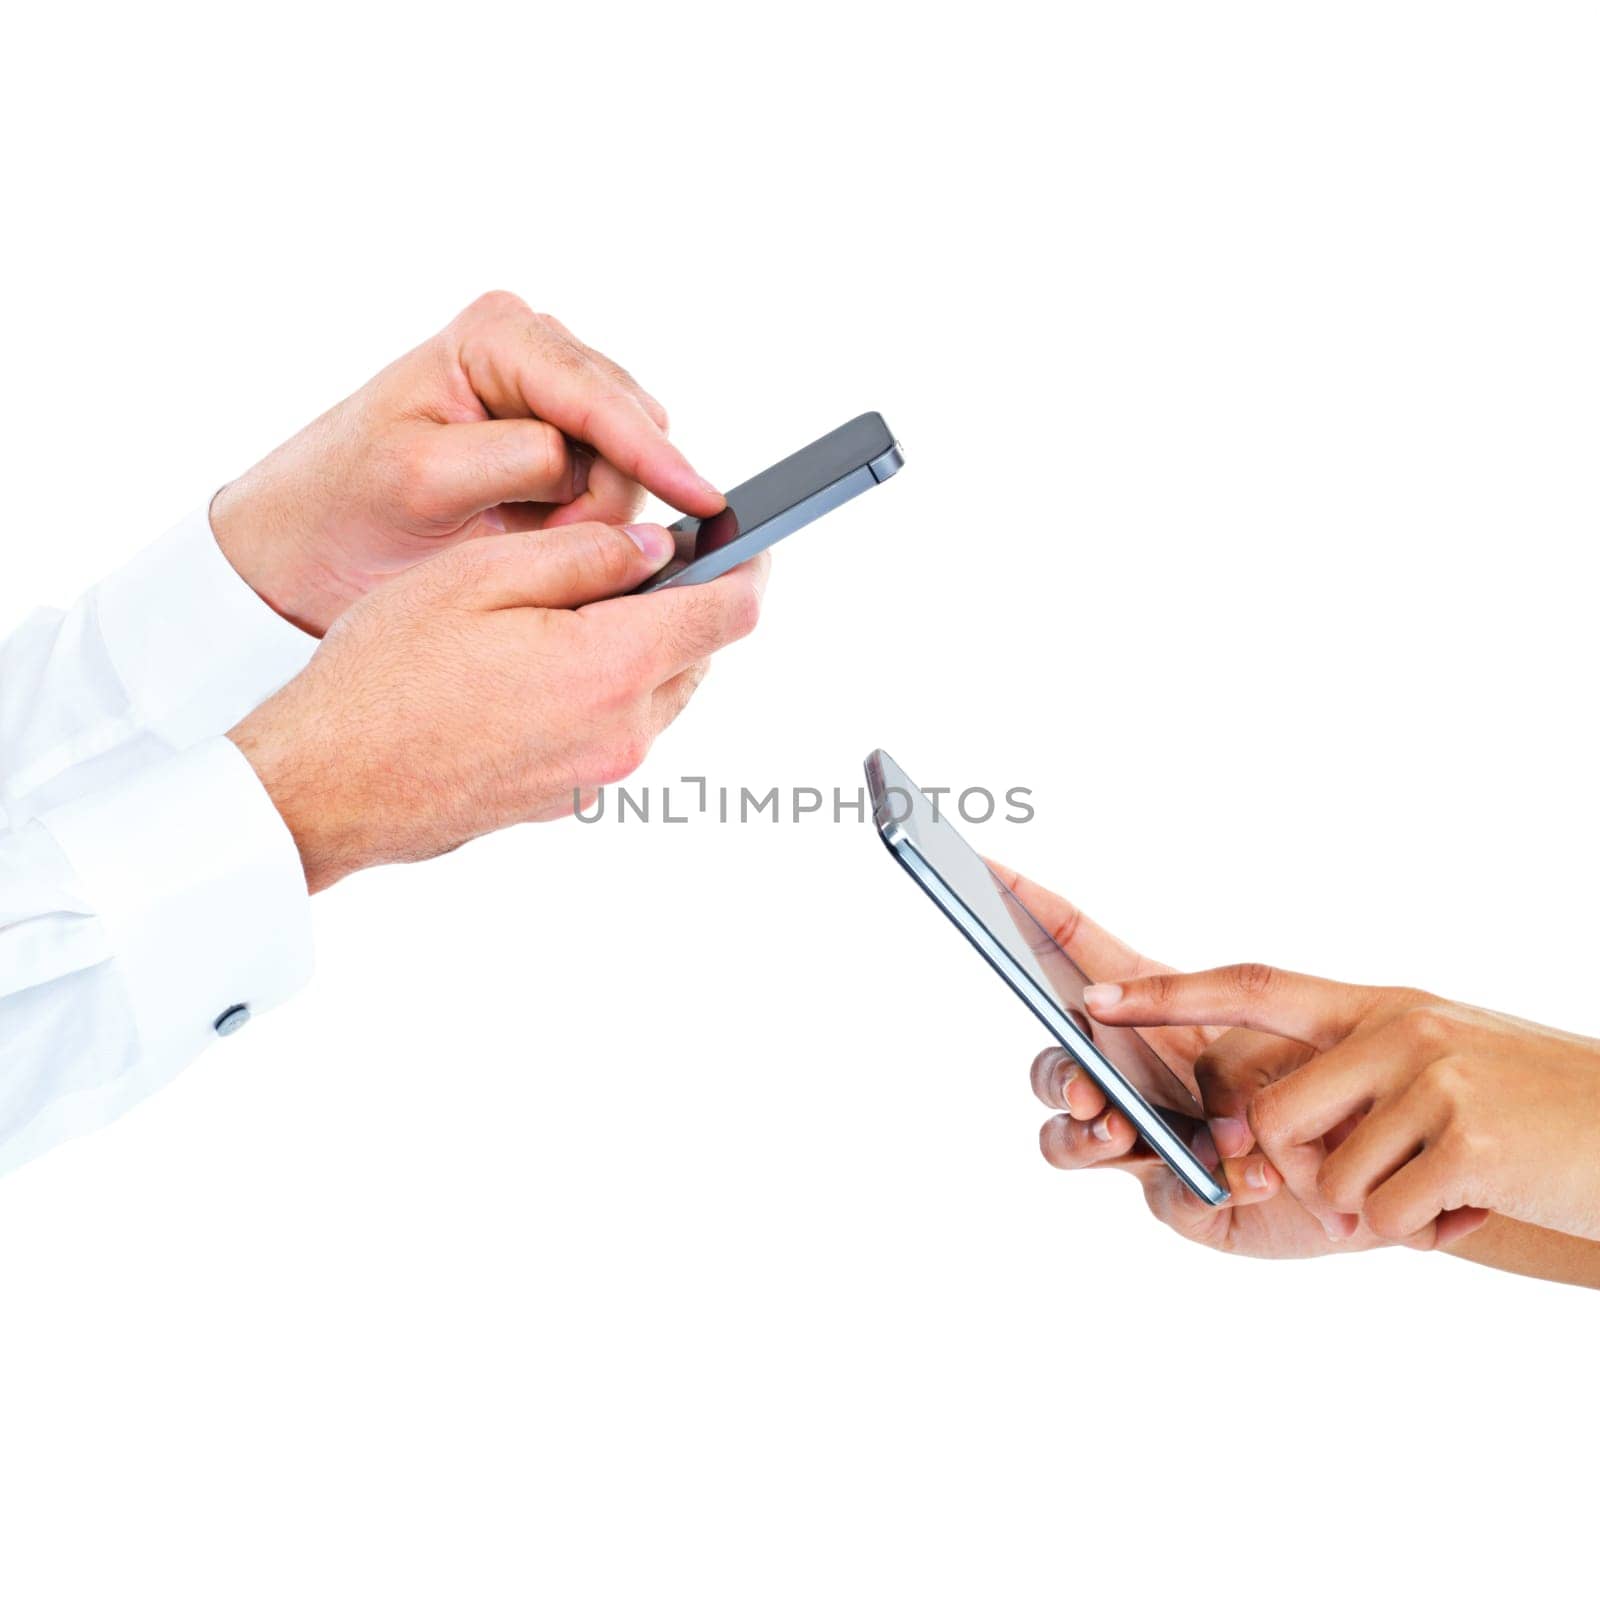 Phone, hands and business people in studio with networking communication closeup on white background. Smartphone, connection and friends with data transfer, file or b2b contact, share or opportunity.